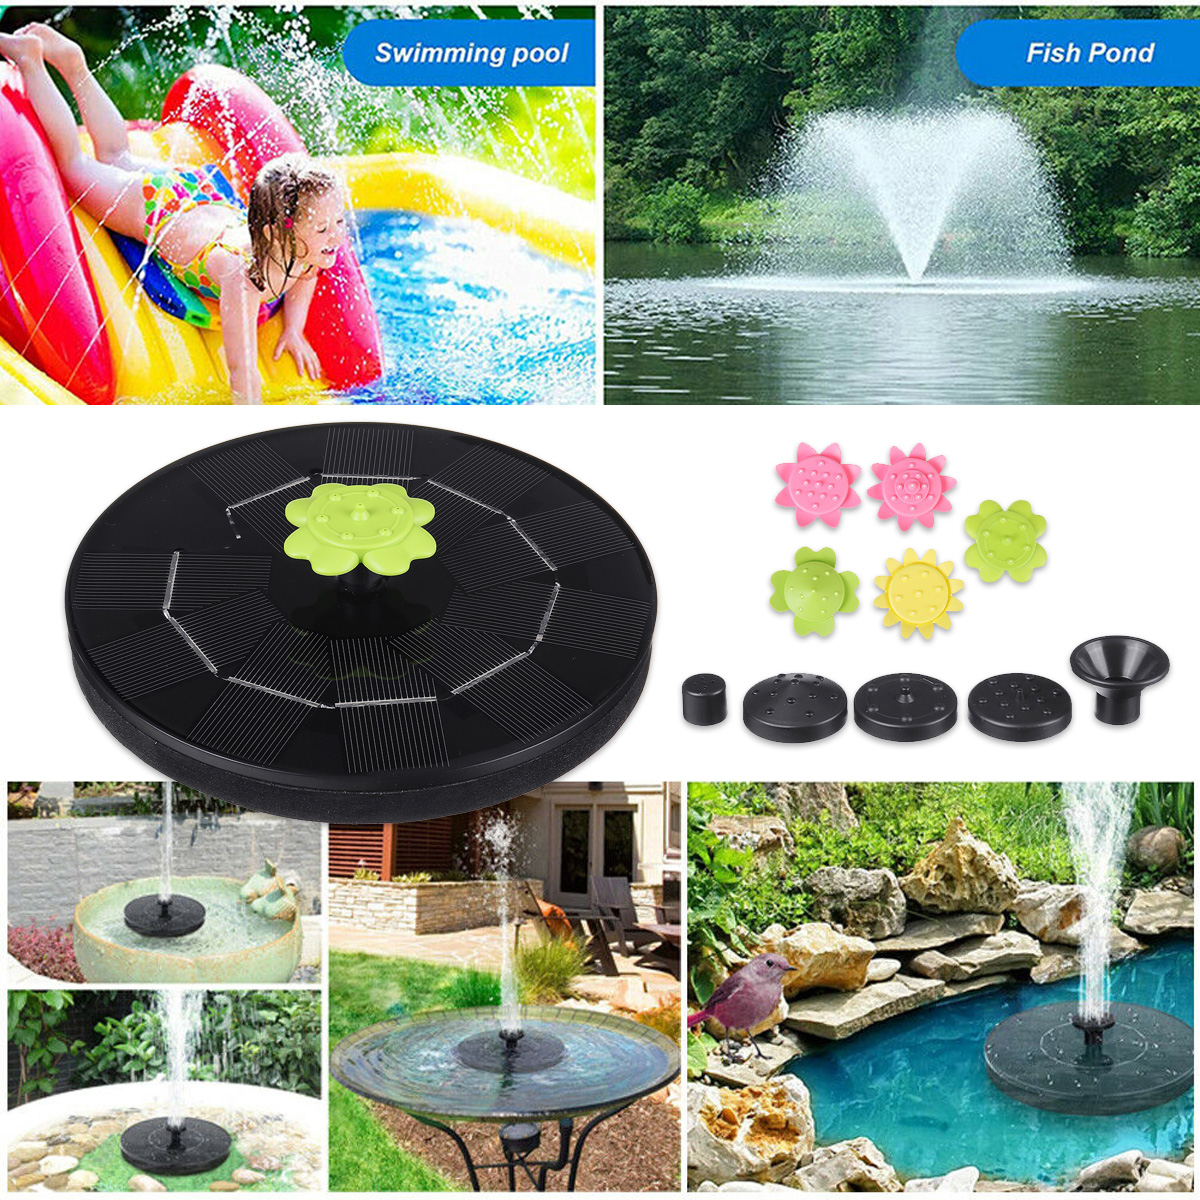 5V-3W-Solar-Powered-Water-Fountain-Pumps-Floating-Fountains-Home-Pond-Garden-Decor-1837061-3